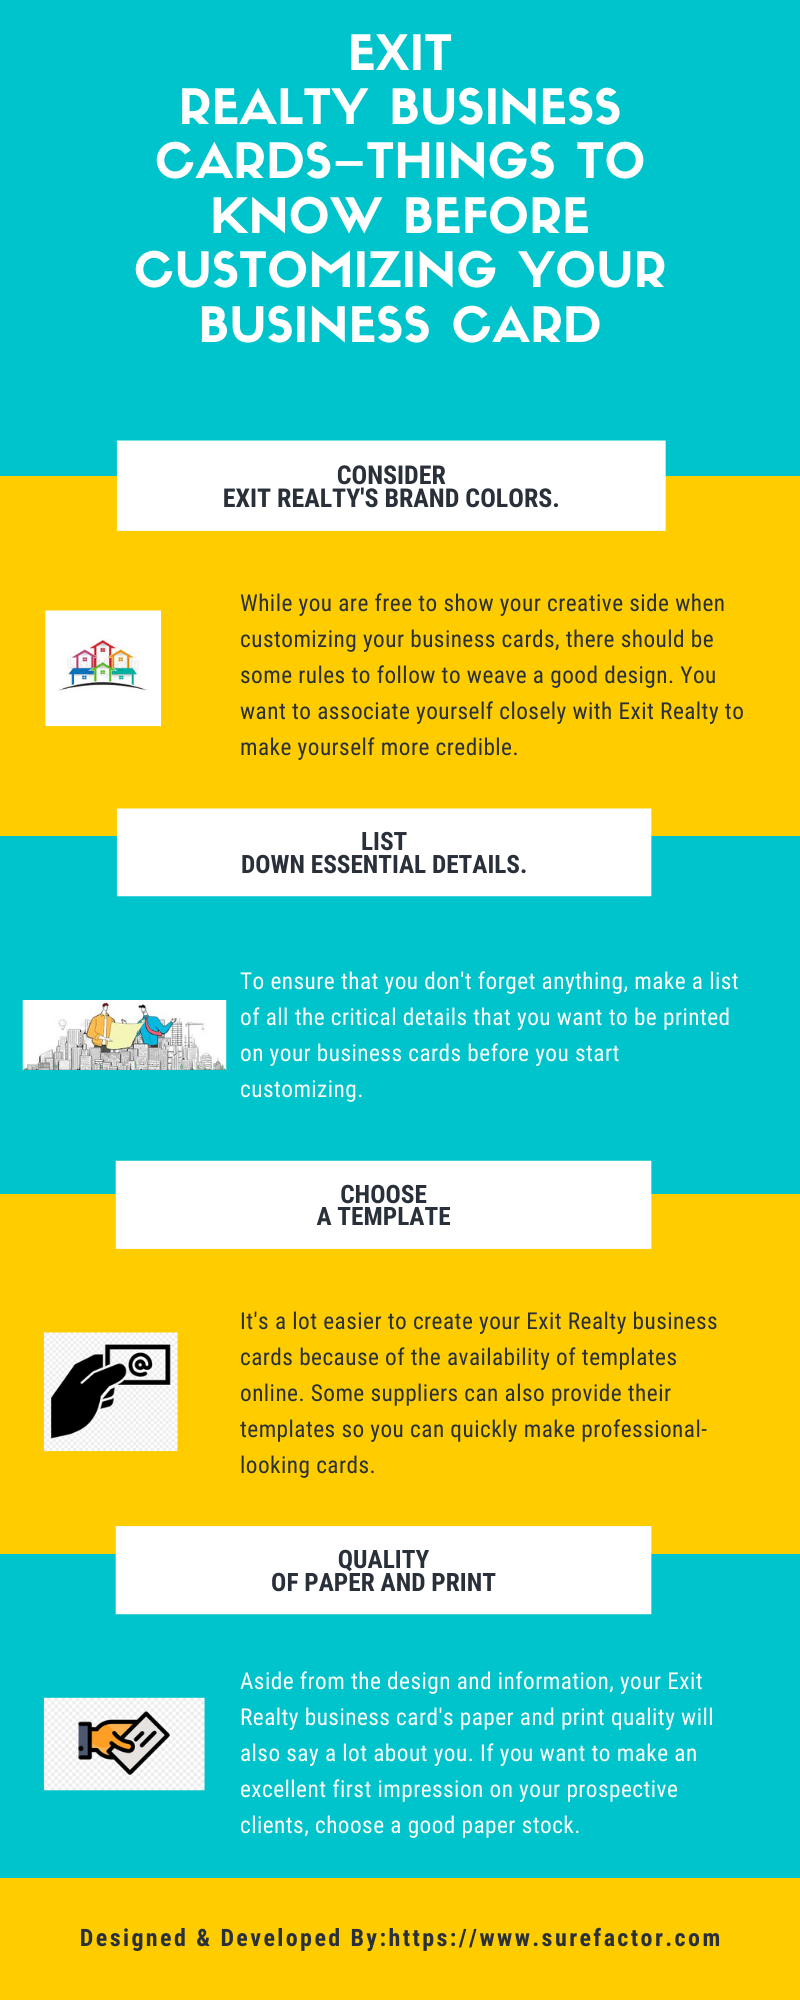 Exit Realty Business Cards – Things to Know Before Customizing Your Business Card.png  by Surefactor